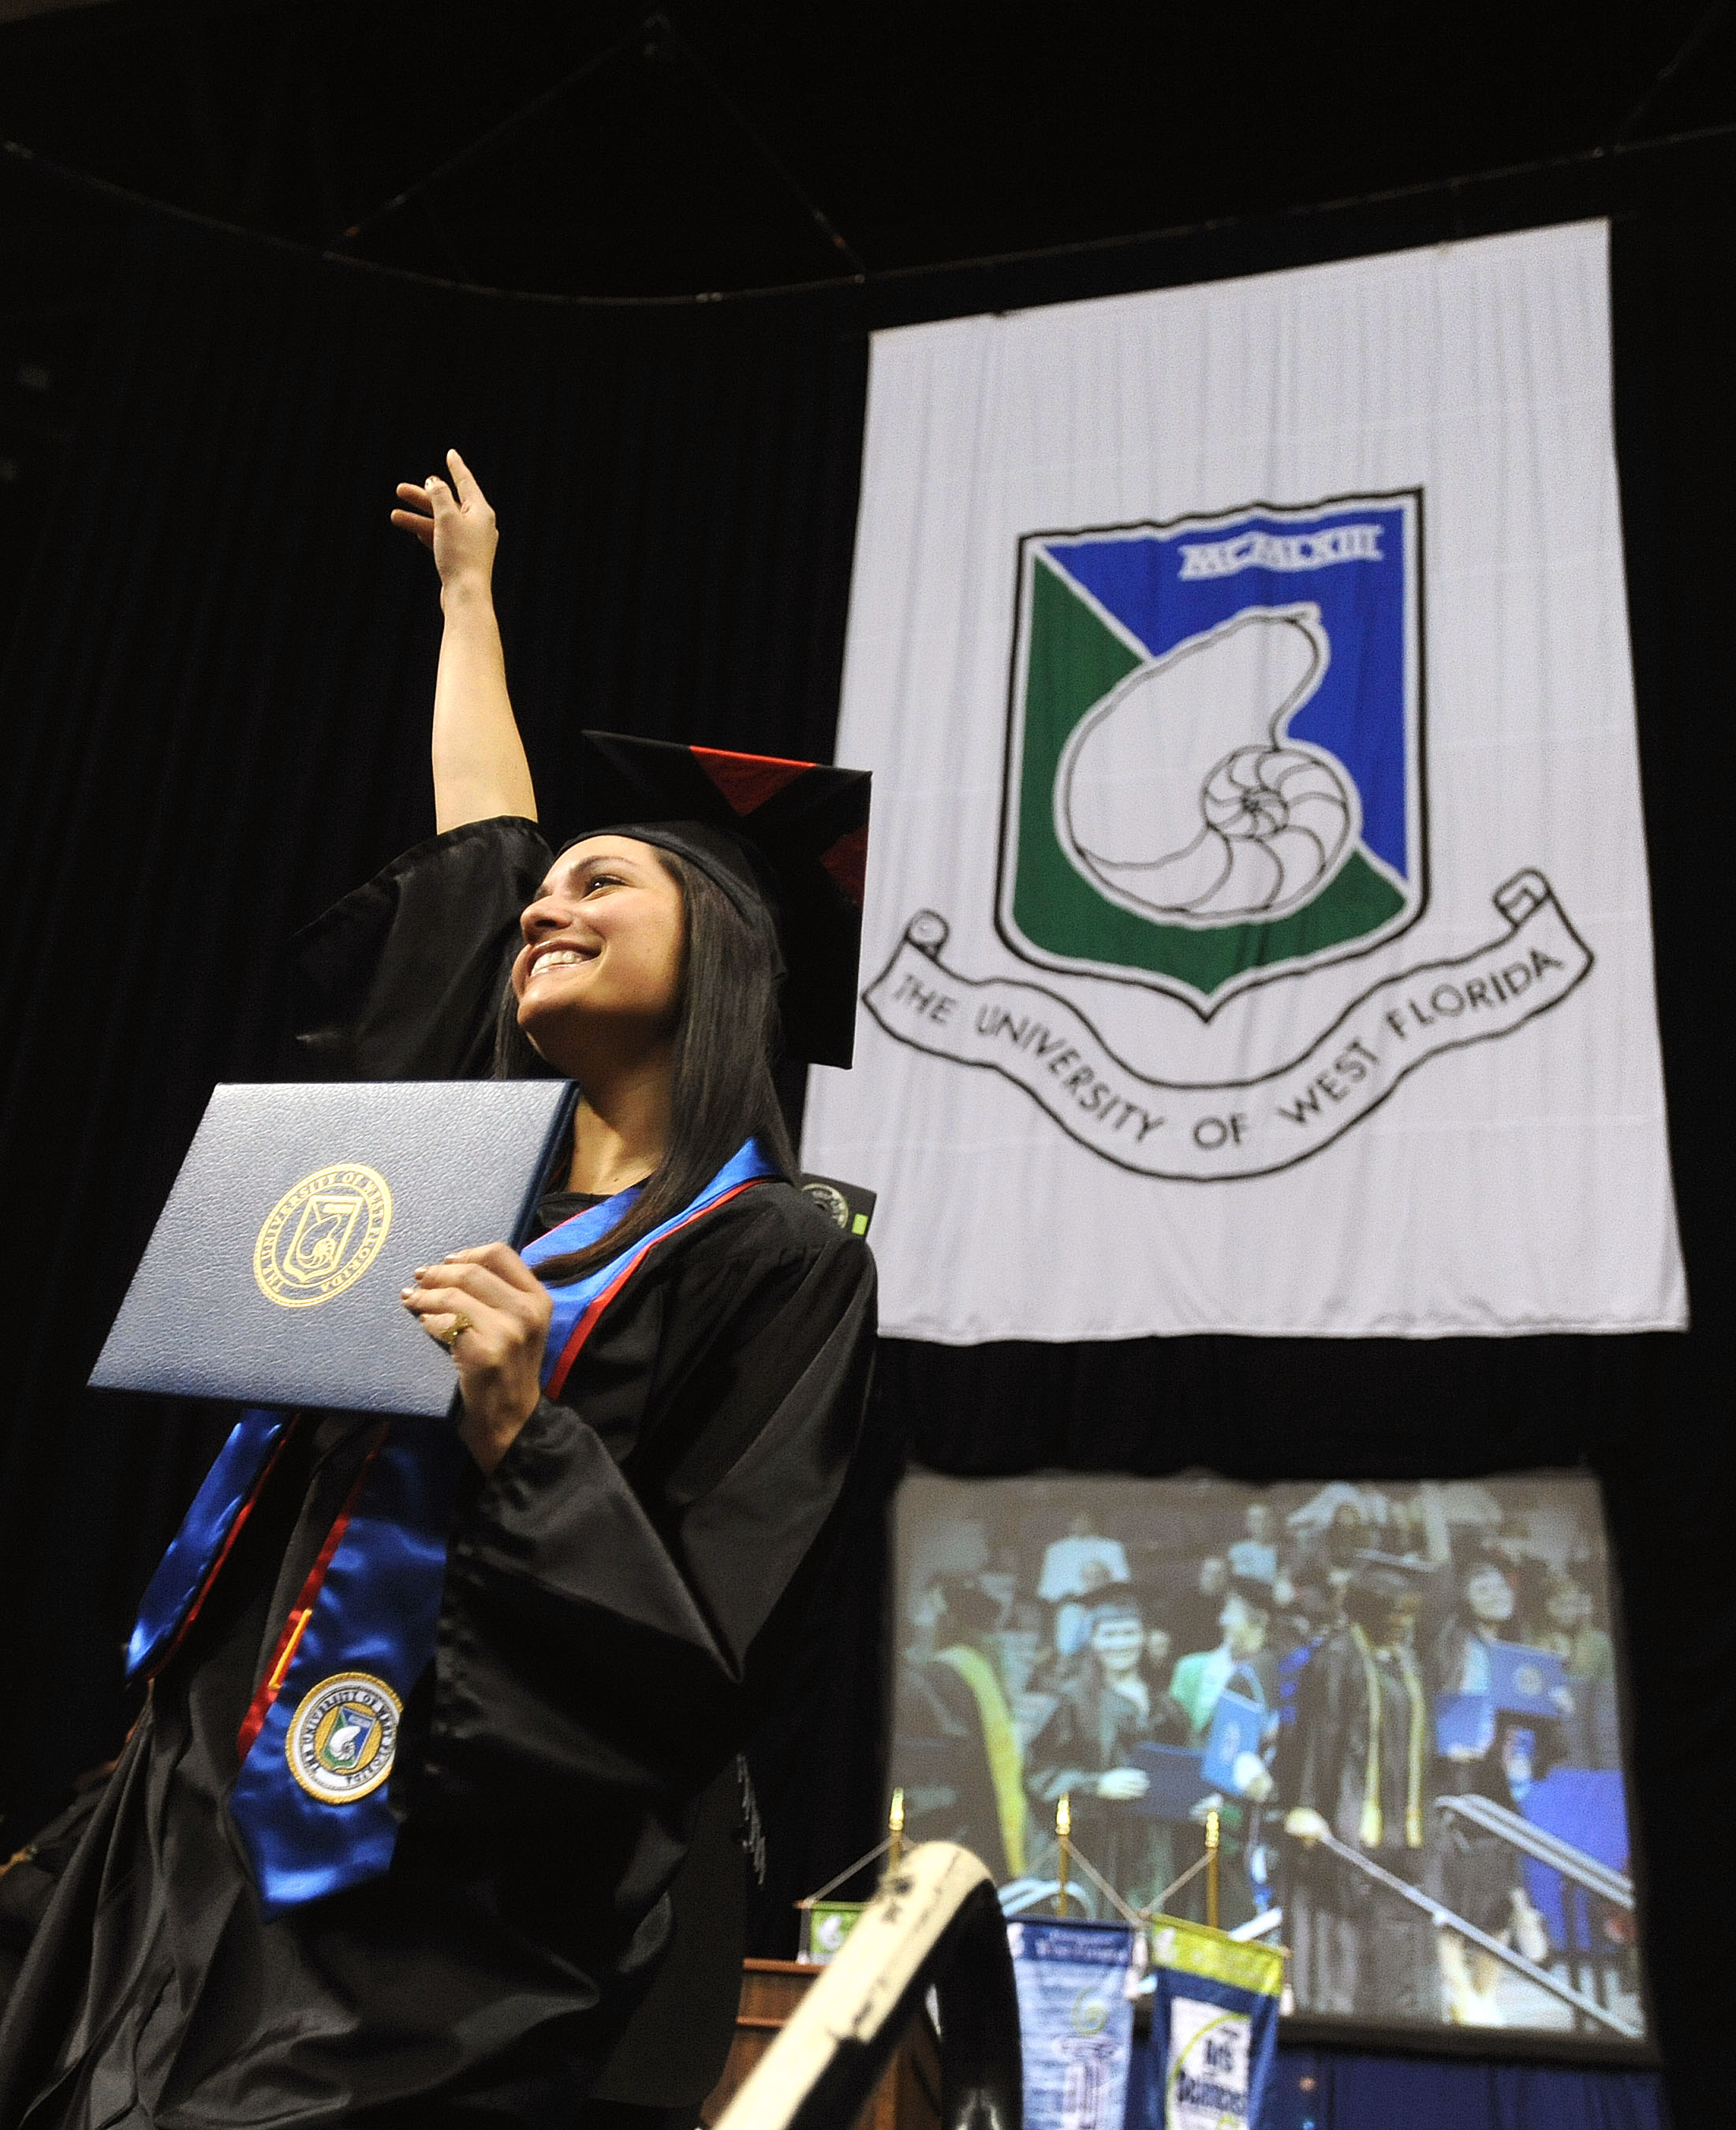 A student proudly displays a diploma cover during commencement.